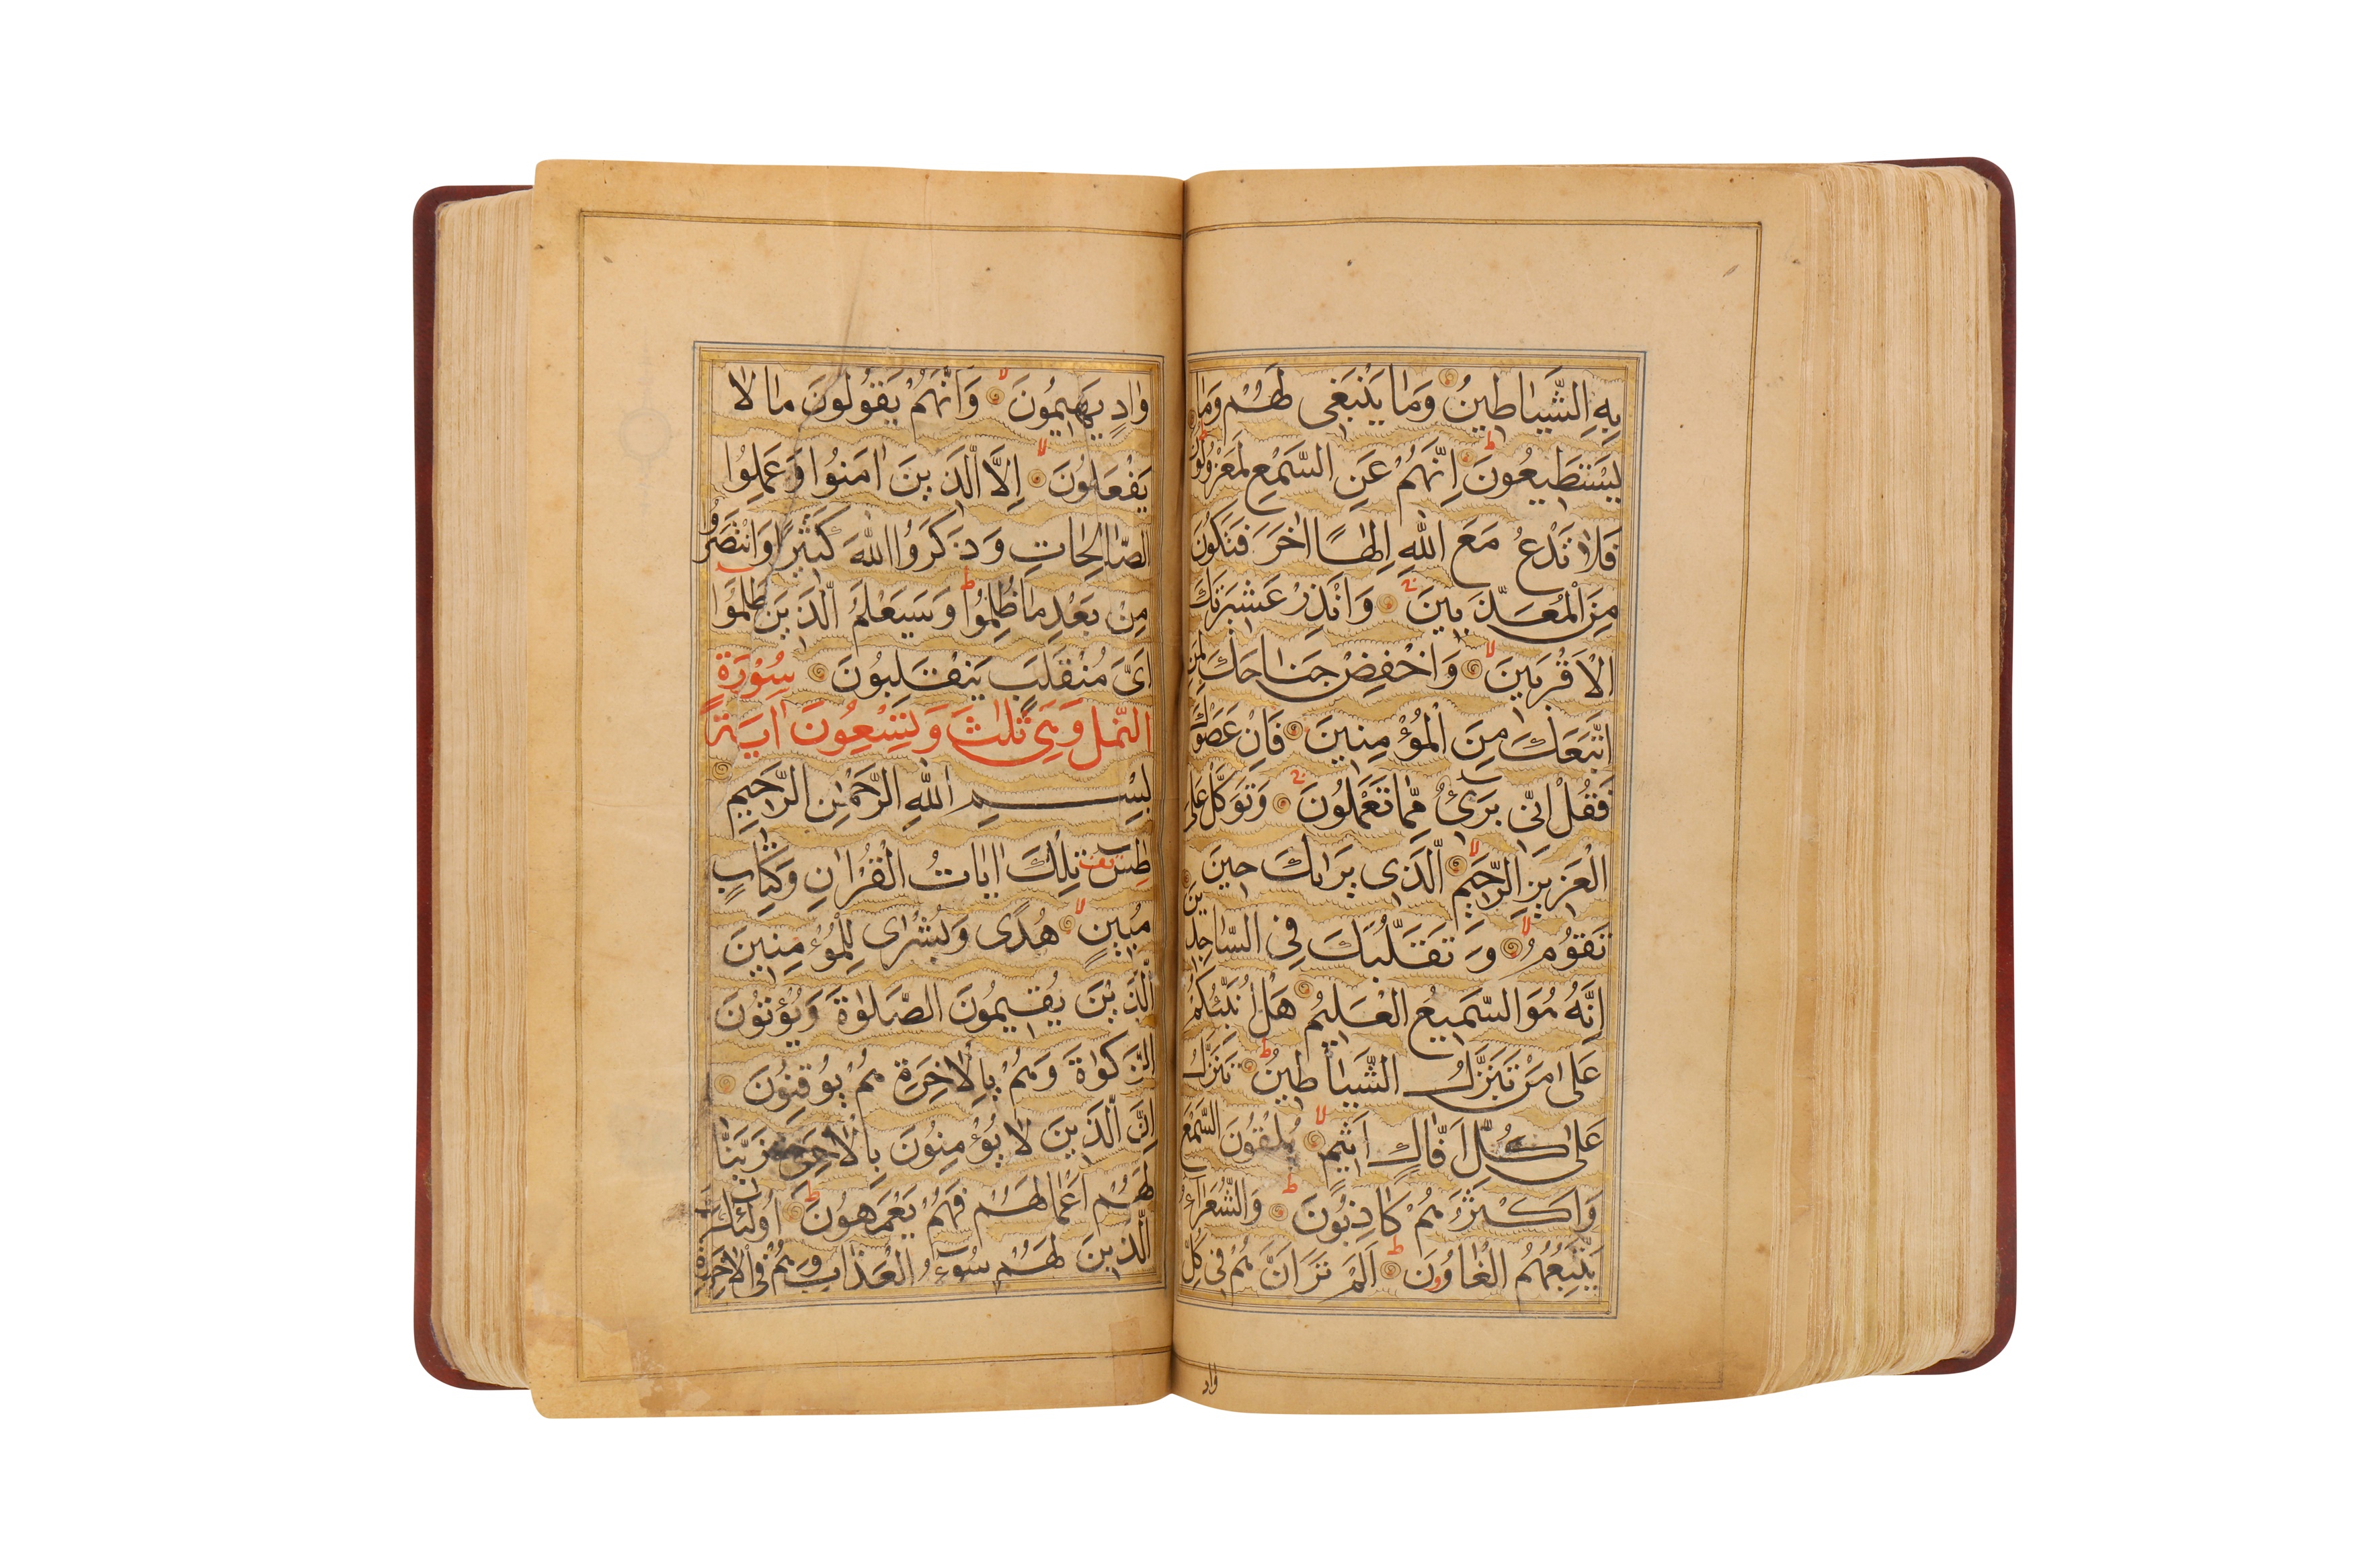 AN ILLUMINATED QUR'AN, INDIA, POSSIBLY 18TH CENTURY Kashmir, North India, probably late 18th centur - Image 8 of 8